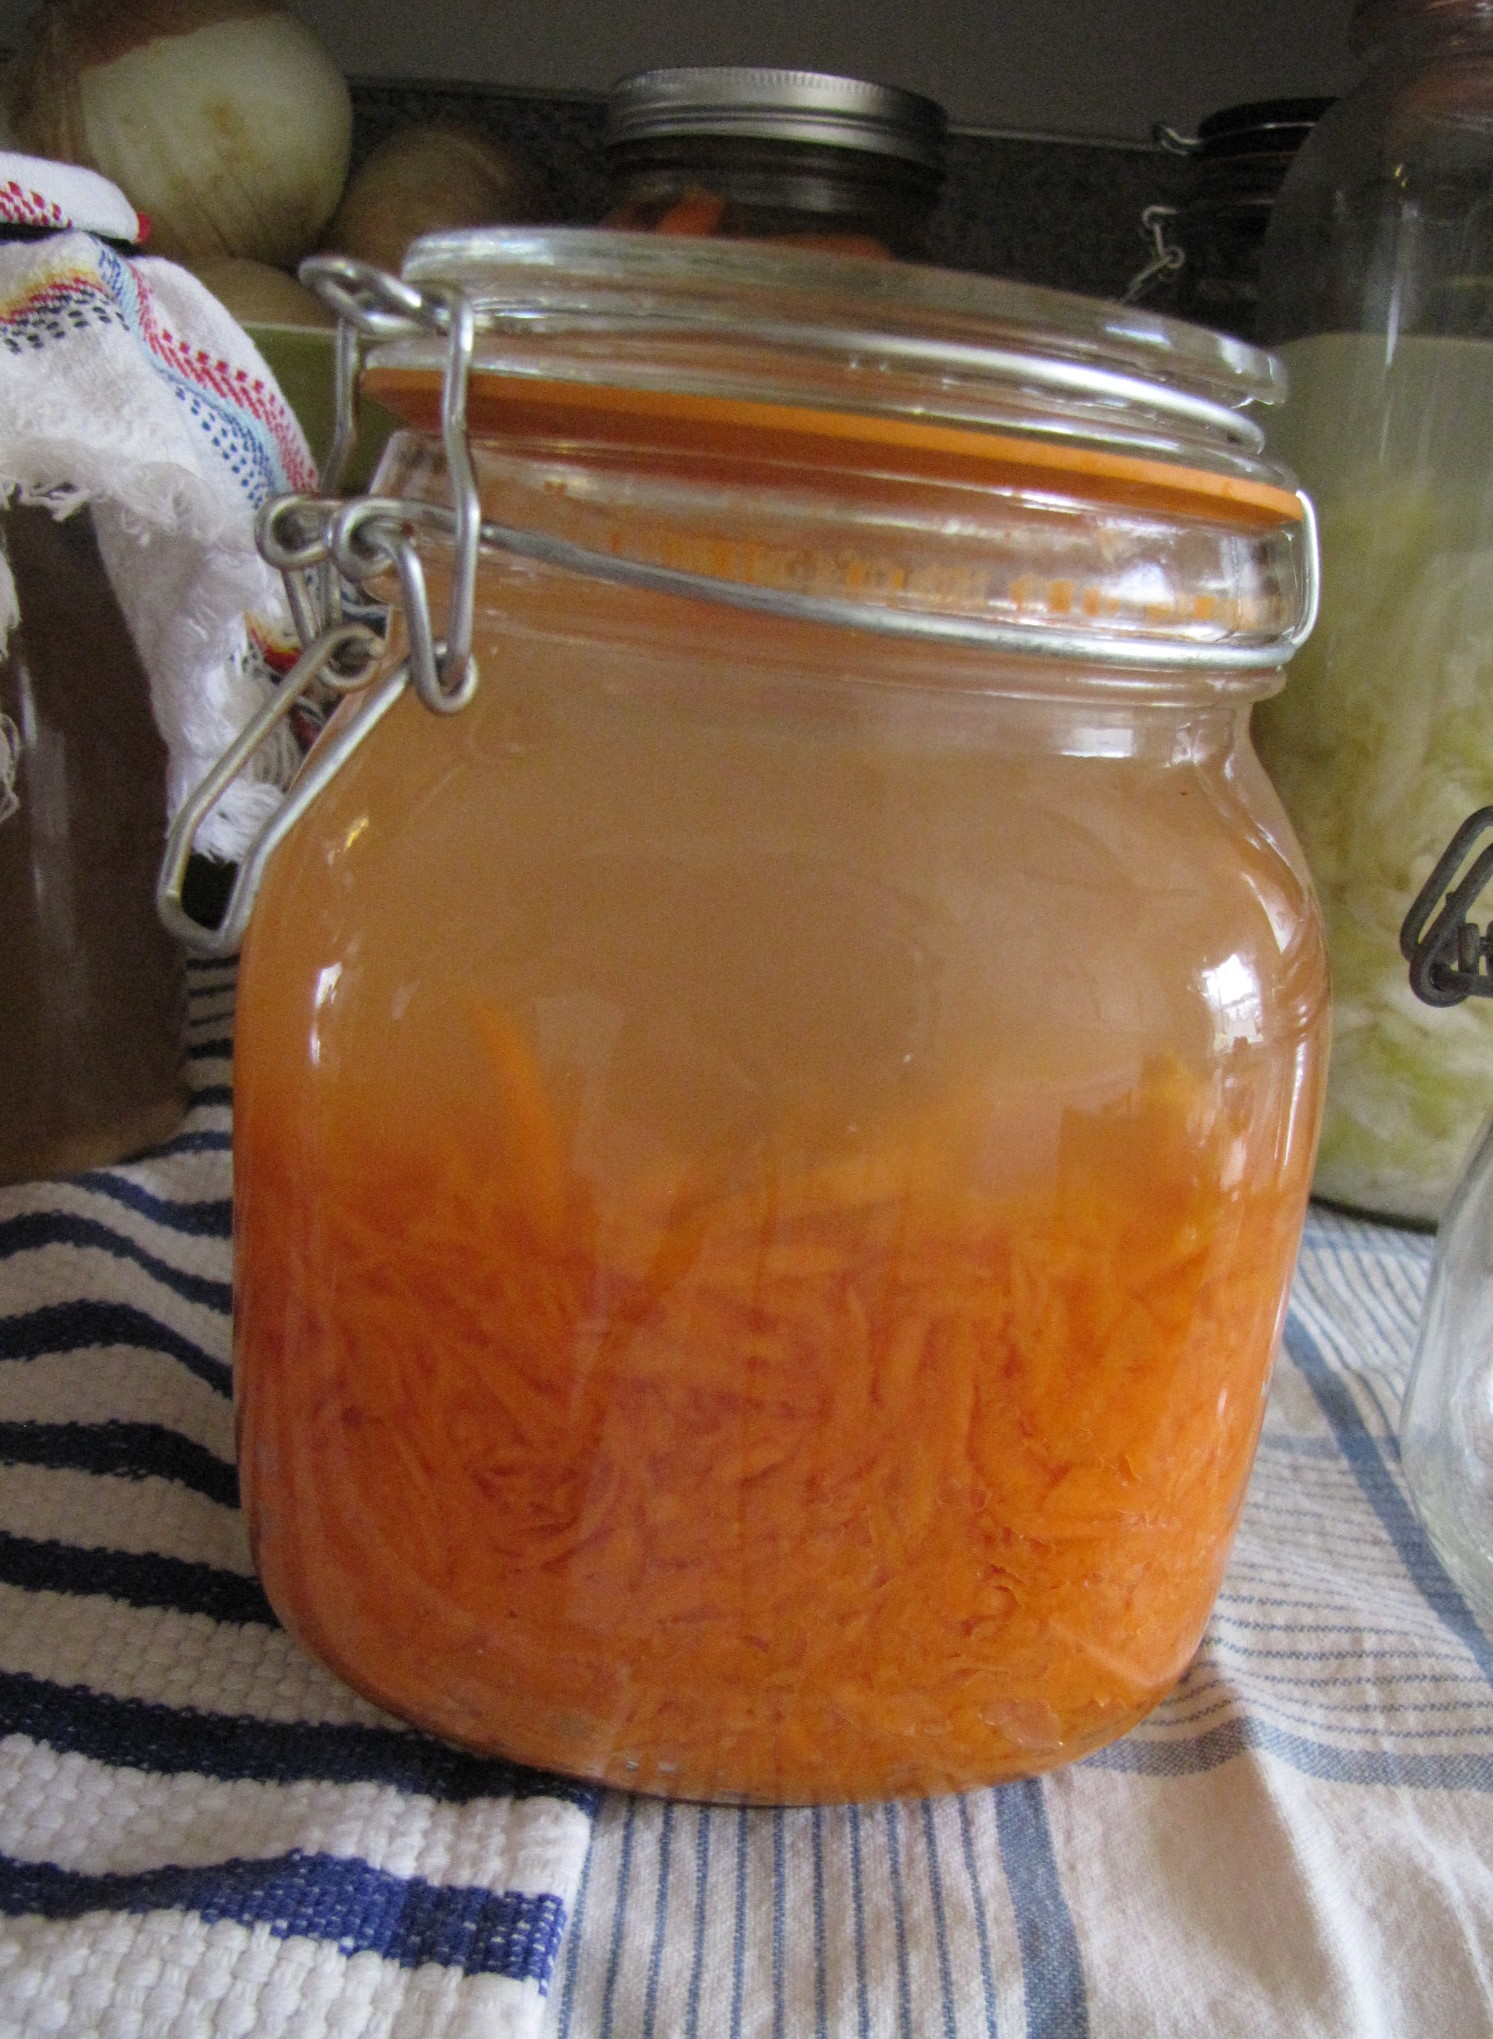 lactofermented shredded ginger carrots.  Recipe from Cultures for Health.  The flavor of the carrots comes through pure and delicious, the bite of ginger is the perfect complement to the saltiness of the brine and tanginess of the lactic acid.  